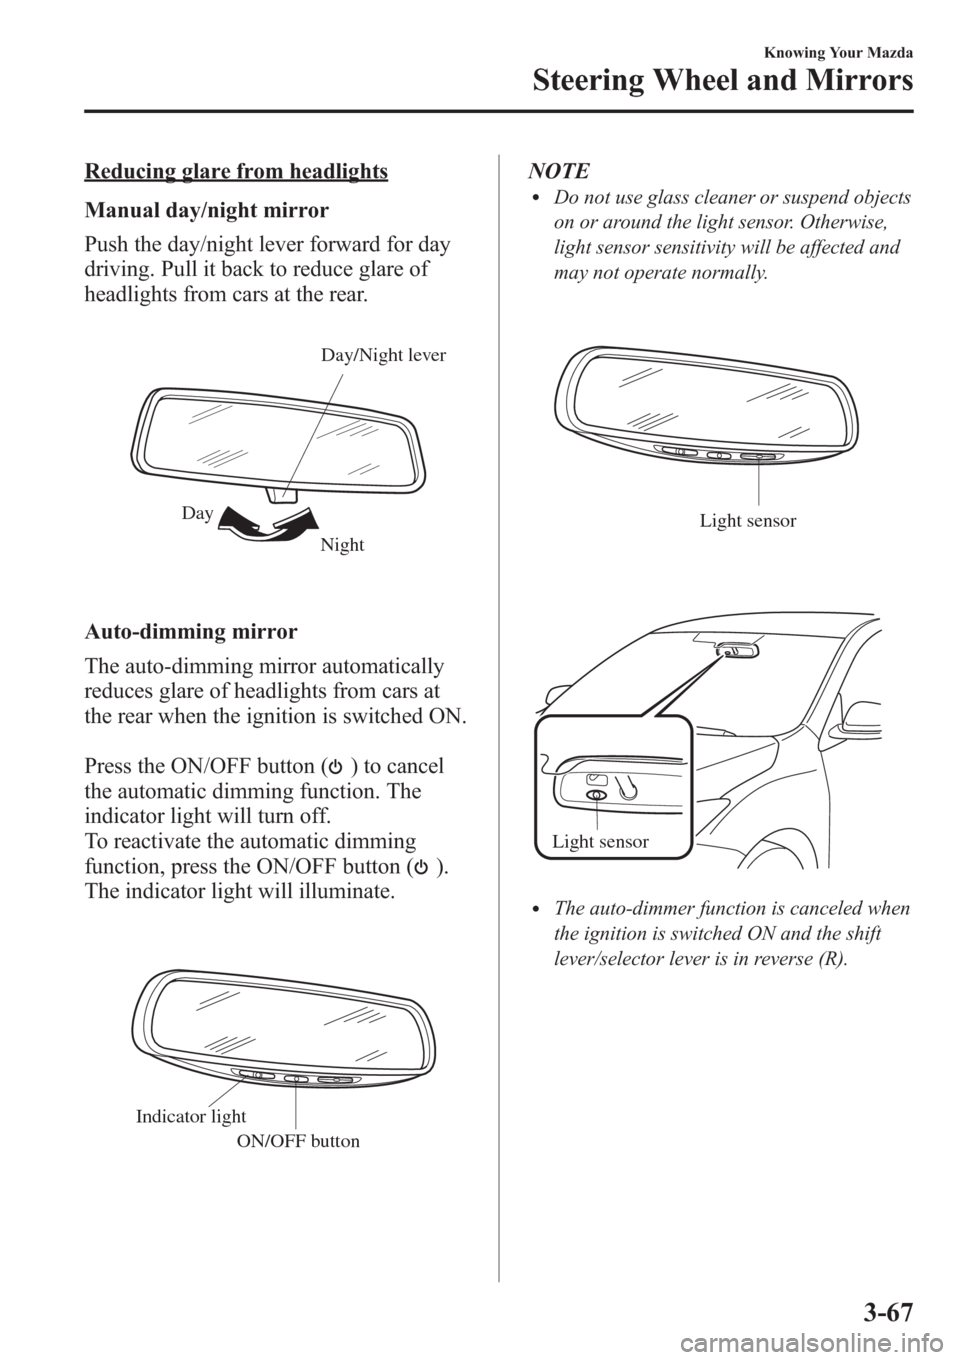 MAZDA MODEL 3 HATCHBACK 2013  Owners Manual (in English) Reducing glare from headlights
Manual day/night mirror
Push the day/night lever forward for day
driving. Pull it back to reduce glare of
headlights from cars at the rear.
Night DayDay/Night lever
Auto